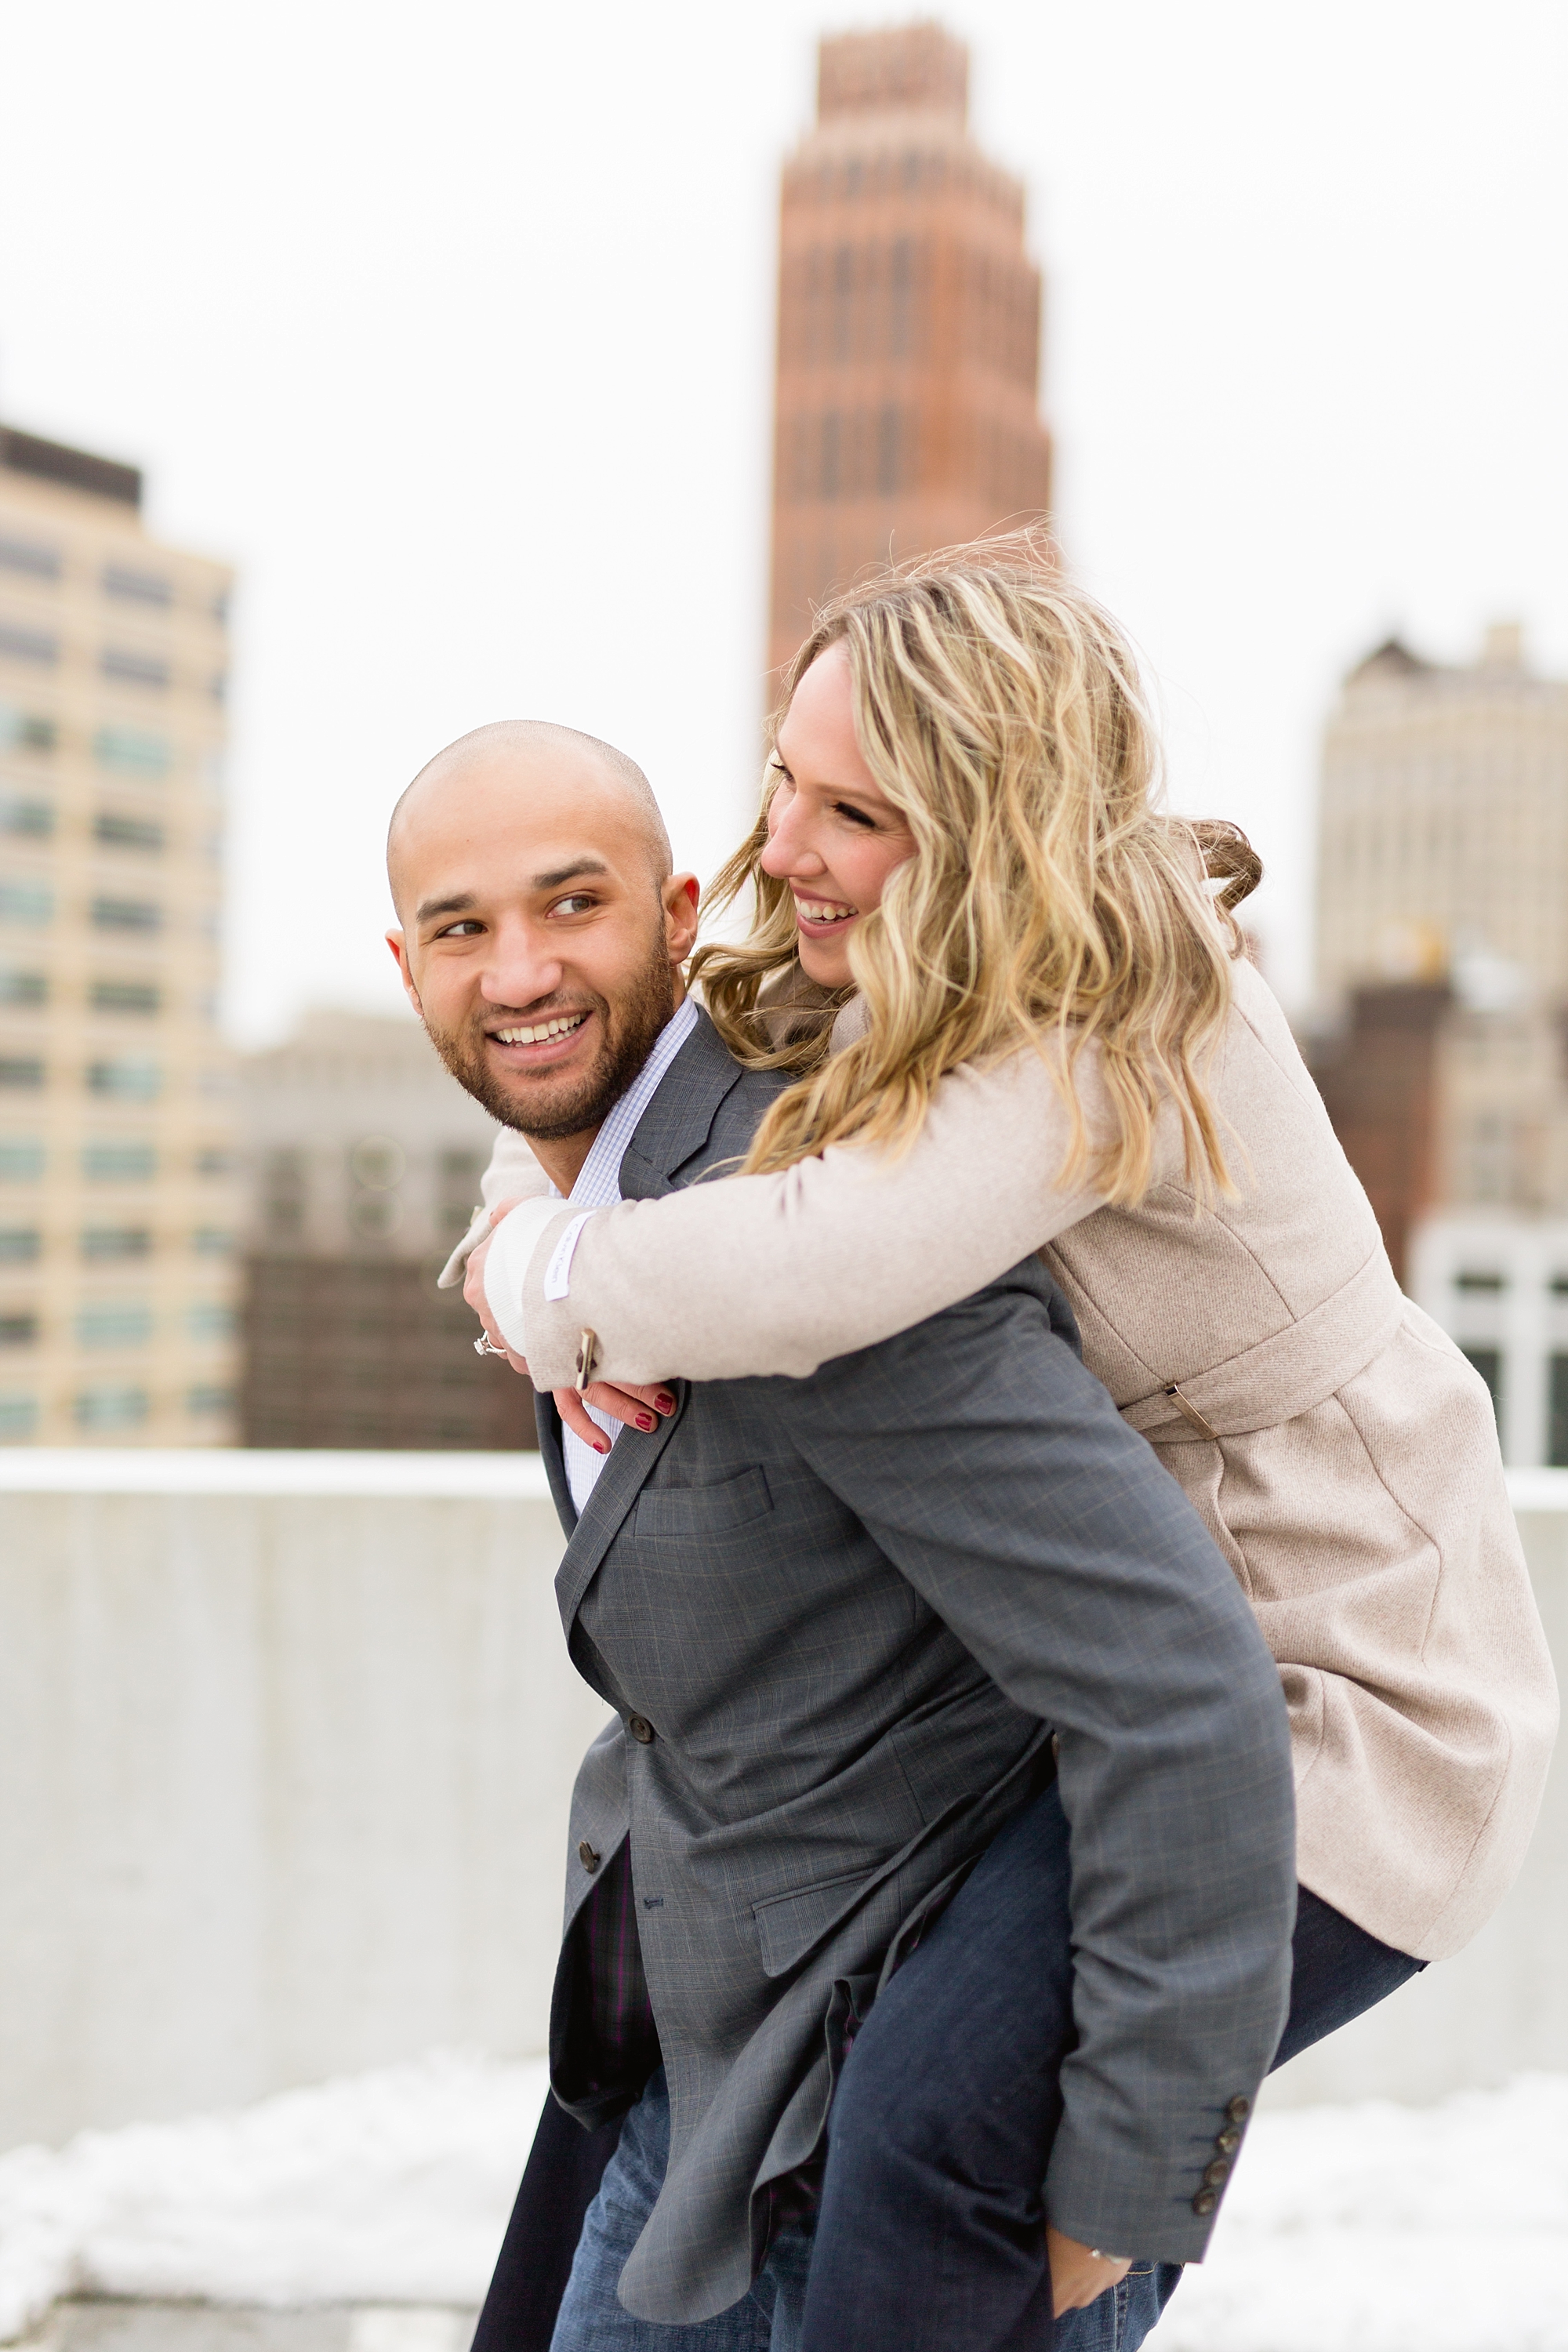 A classic Downtown Detroit winter engagement throughout the city streets by Breanne Rochelle Photography.